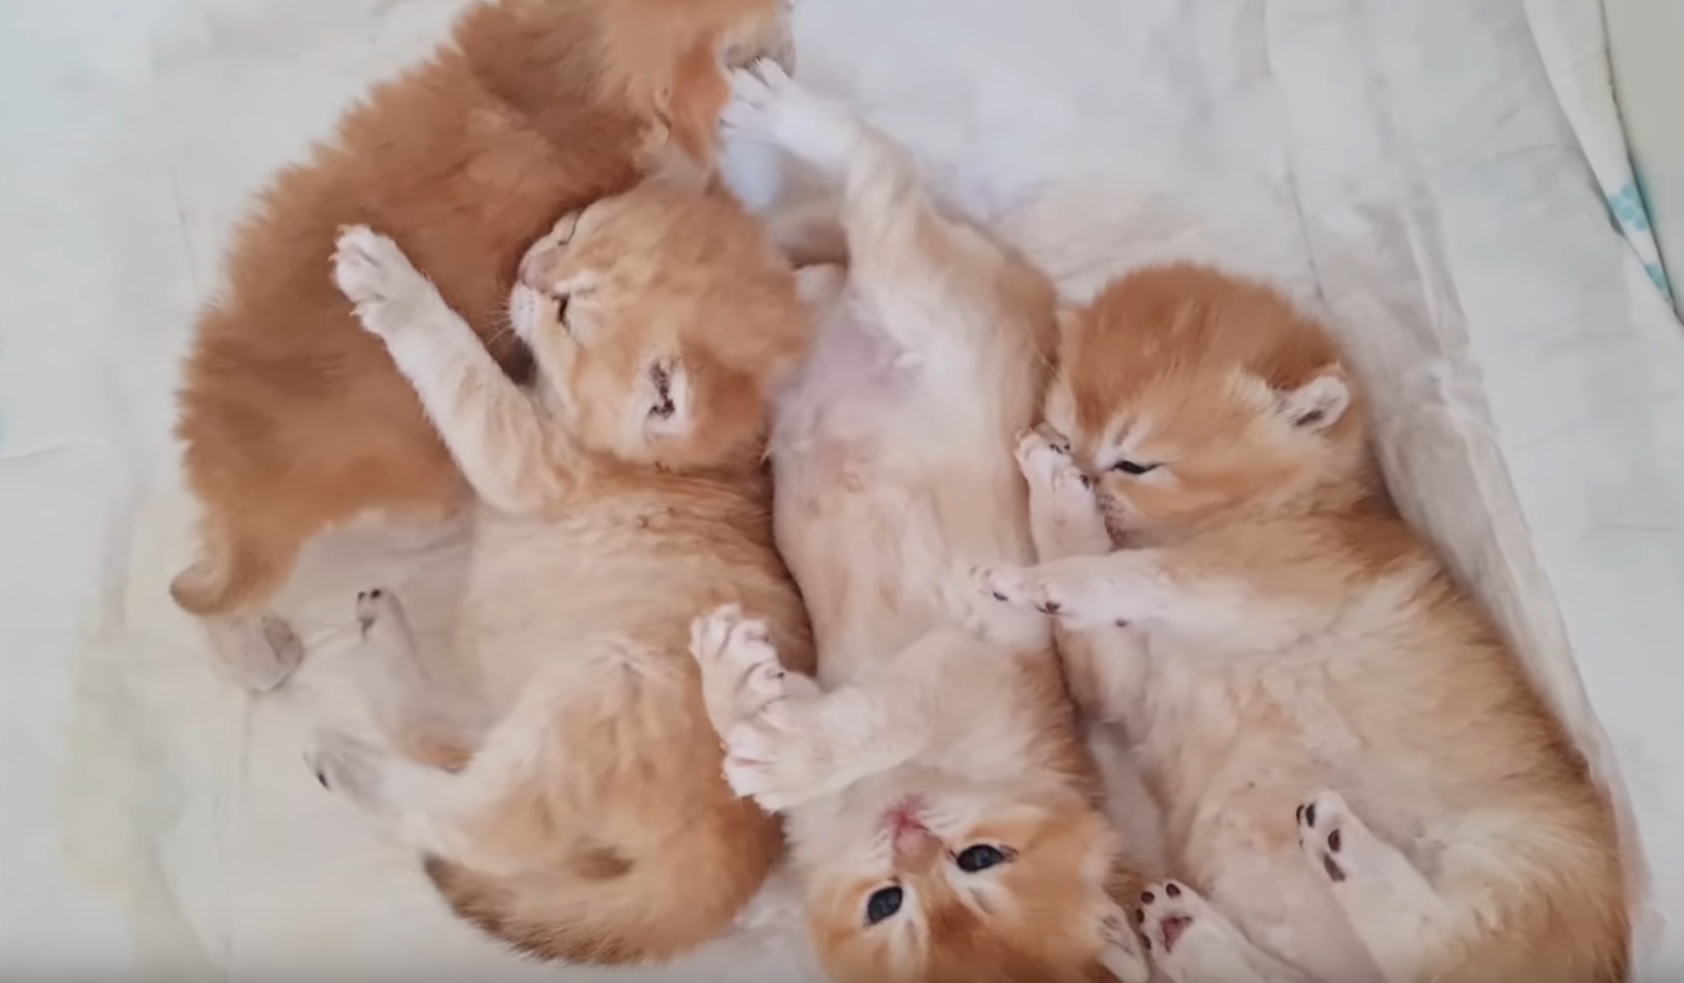 Adorable Video With Tiny Kittens